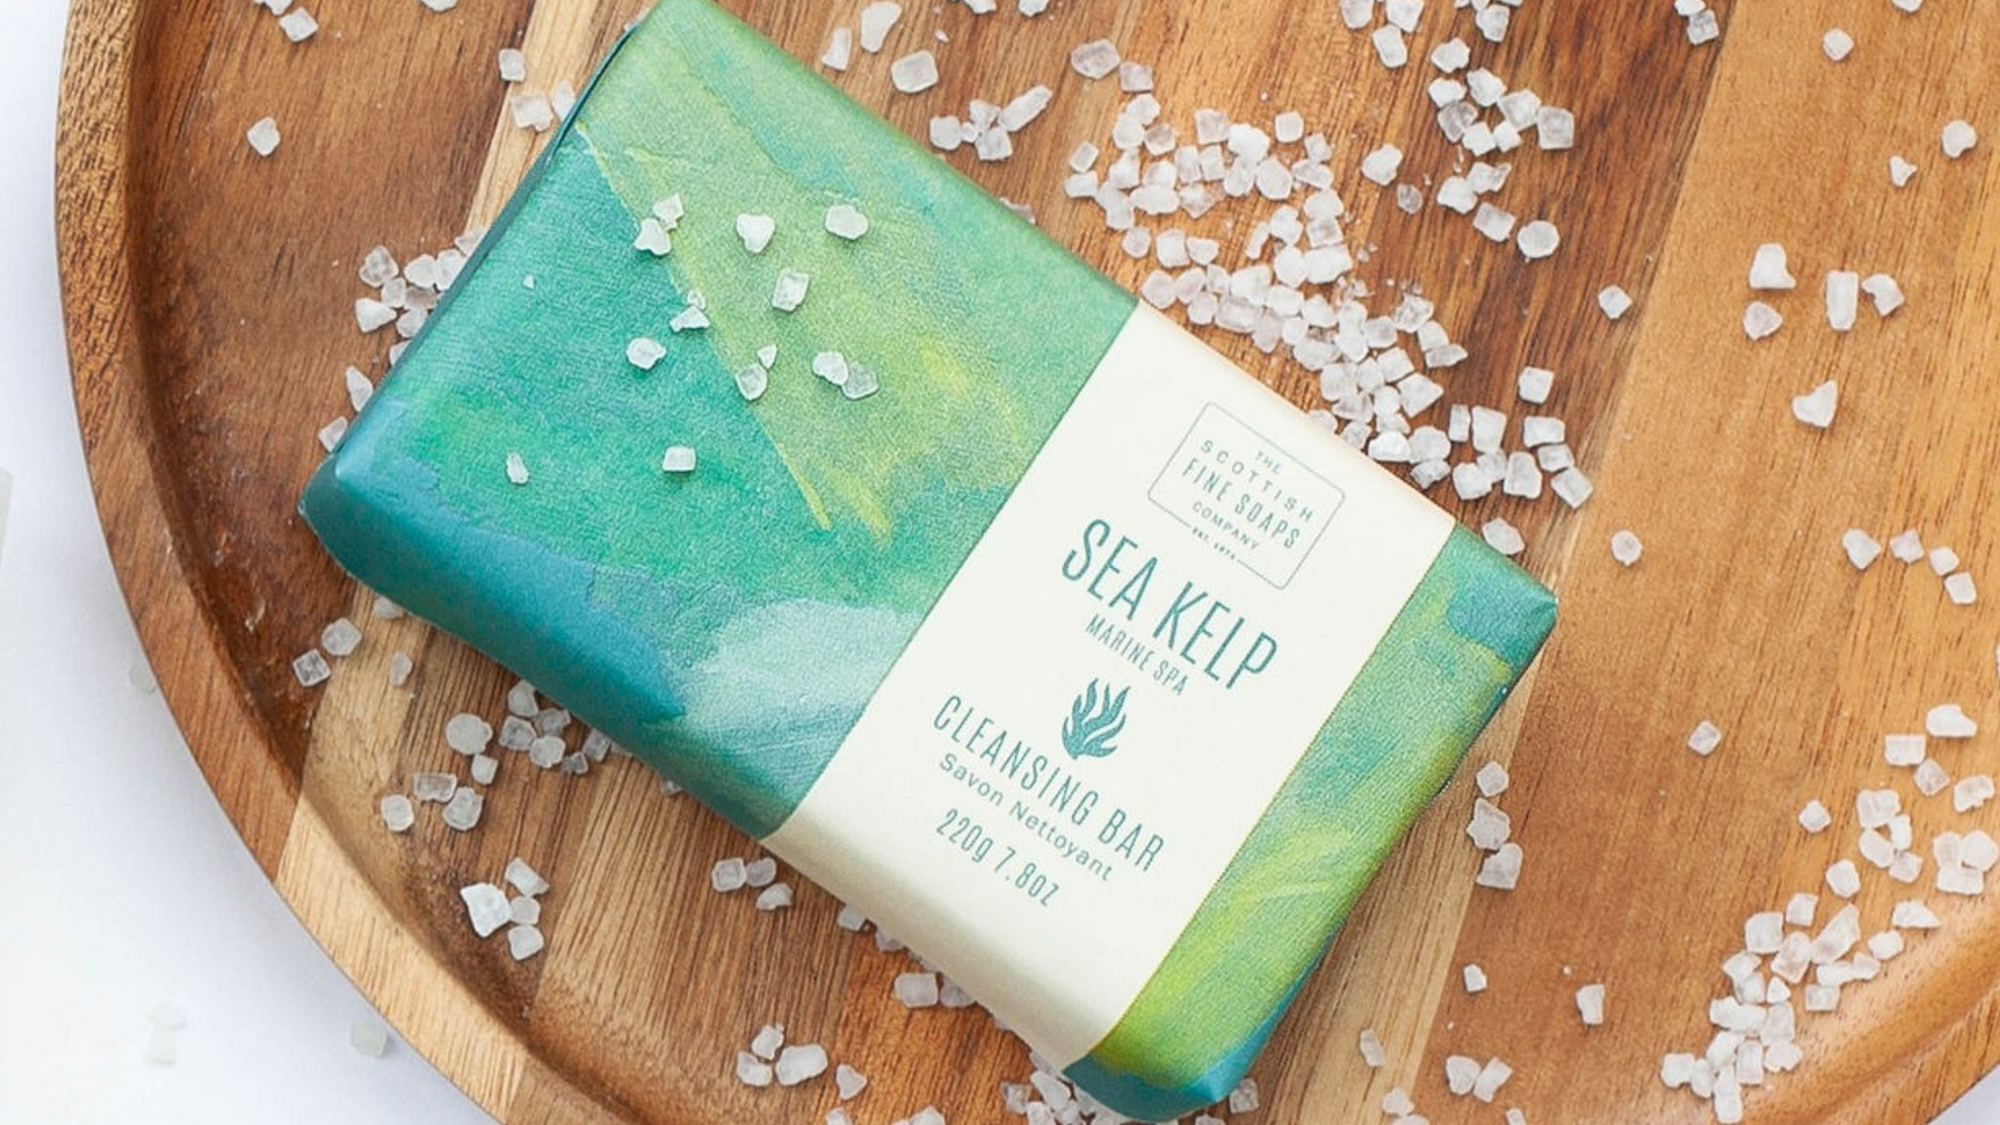 Sea Kelp Cleansing Bar: An Eco-Friendly & Cost-Effective Solution For Cleaning Makeup Brushes